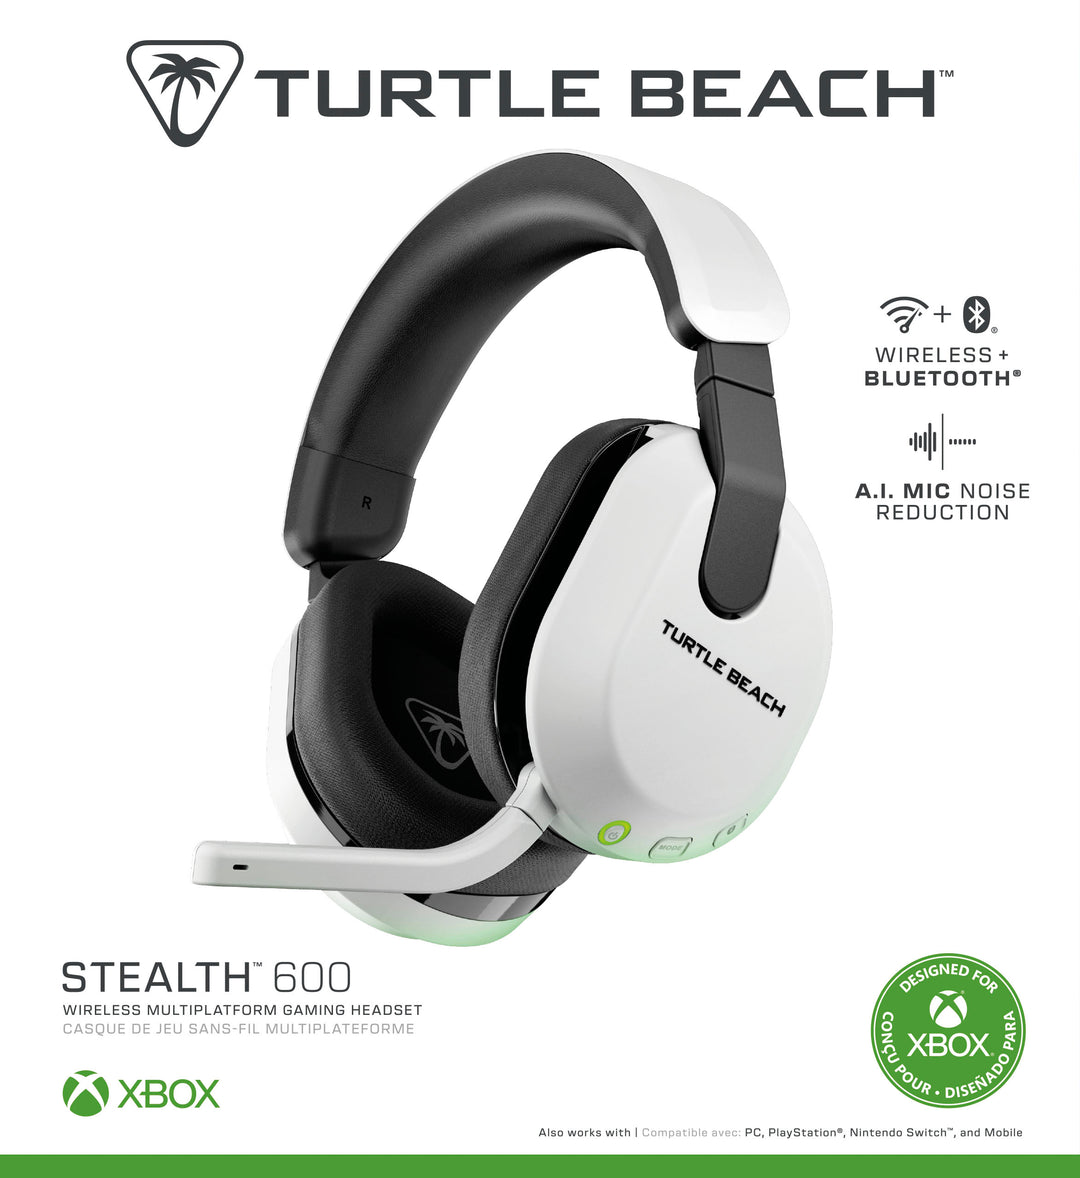 Turtle Beach Stealth 600 Wireless Gaming Headset for Xbox Series X|S, PC, PS5, PS4, Nintendo Switch with 80-Hr Battery - White_10